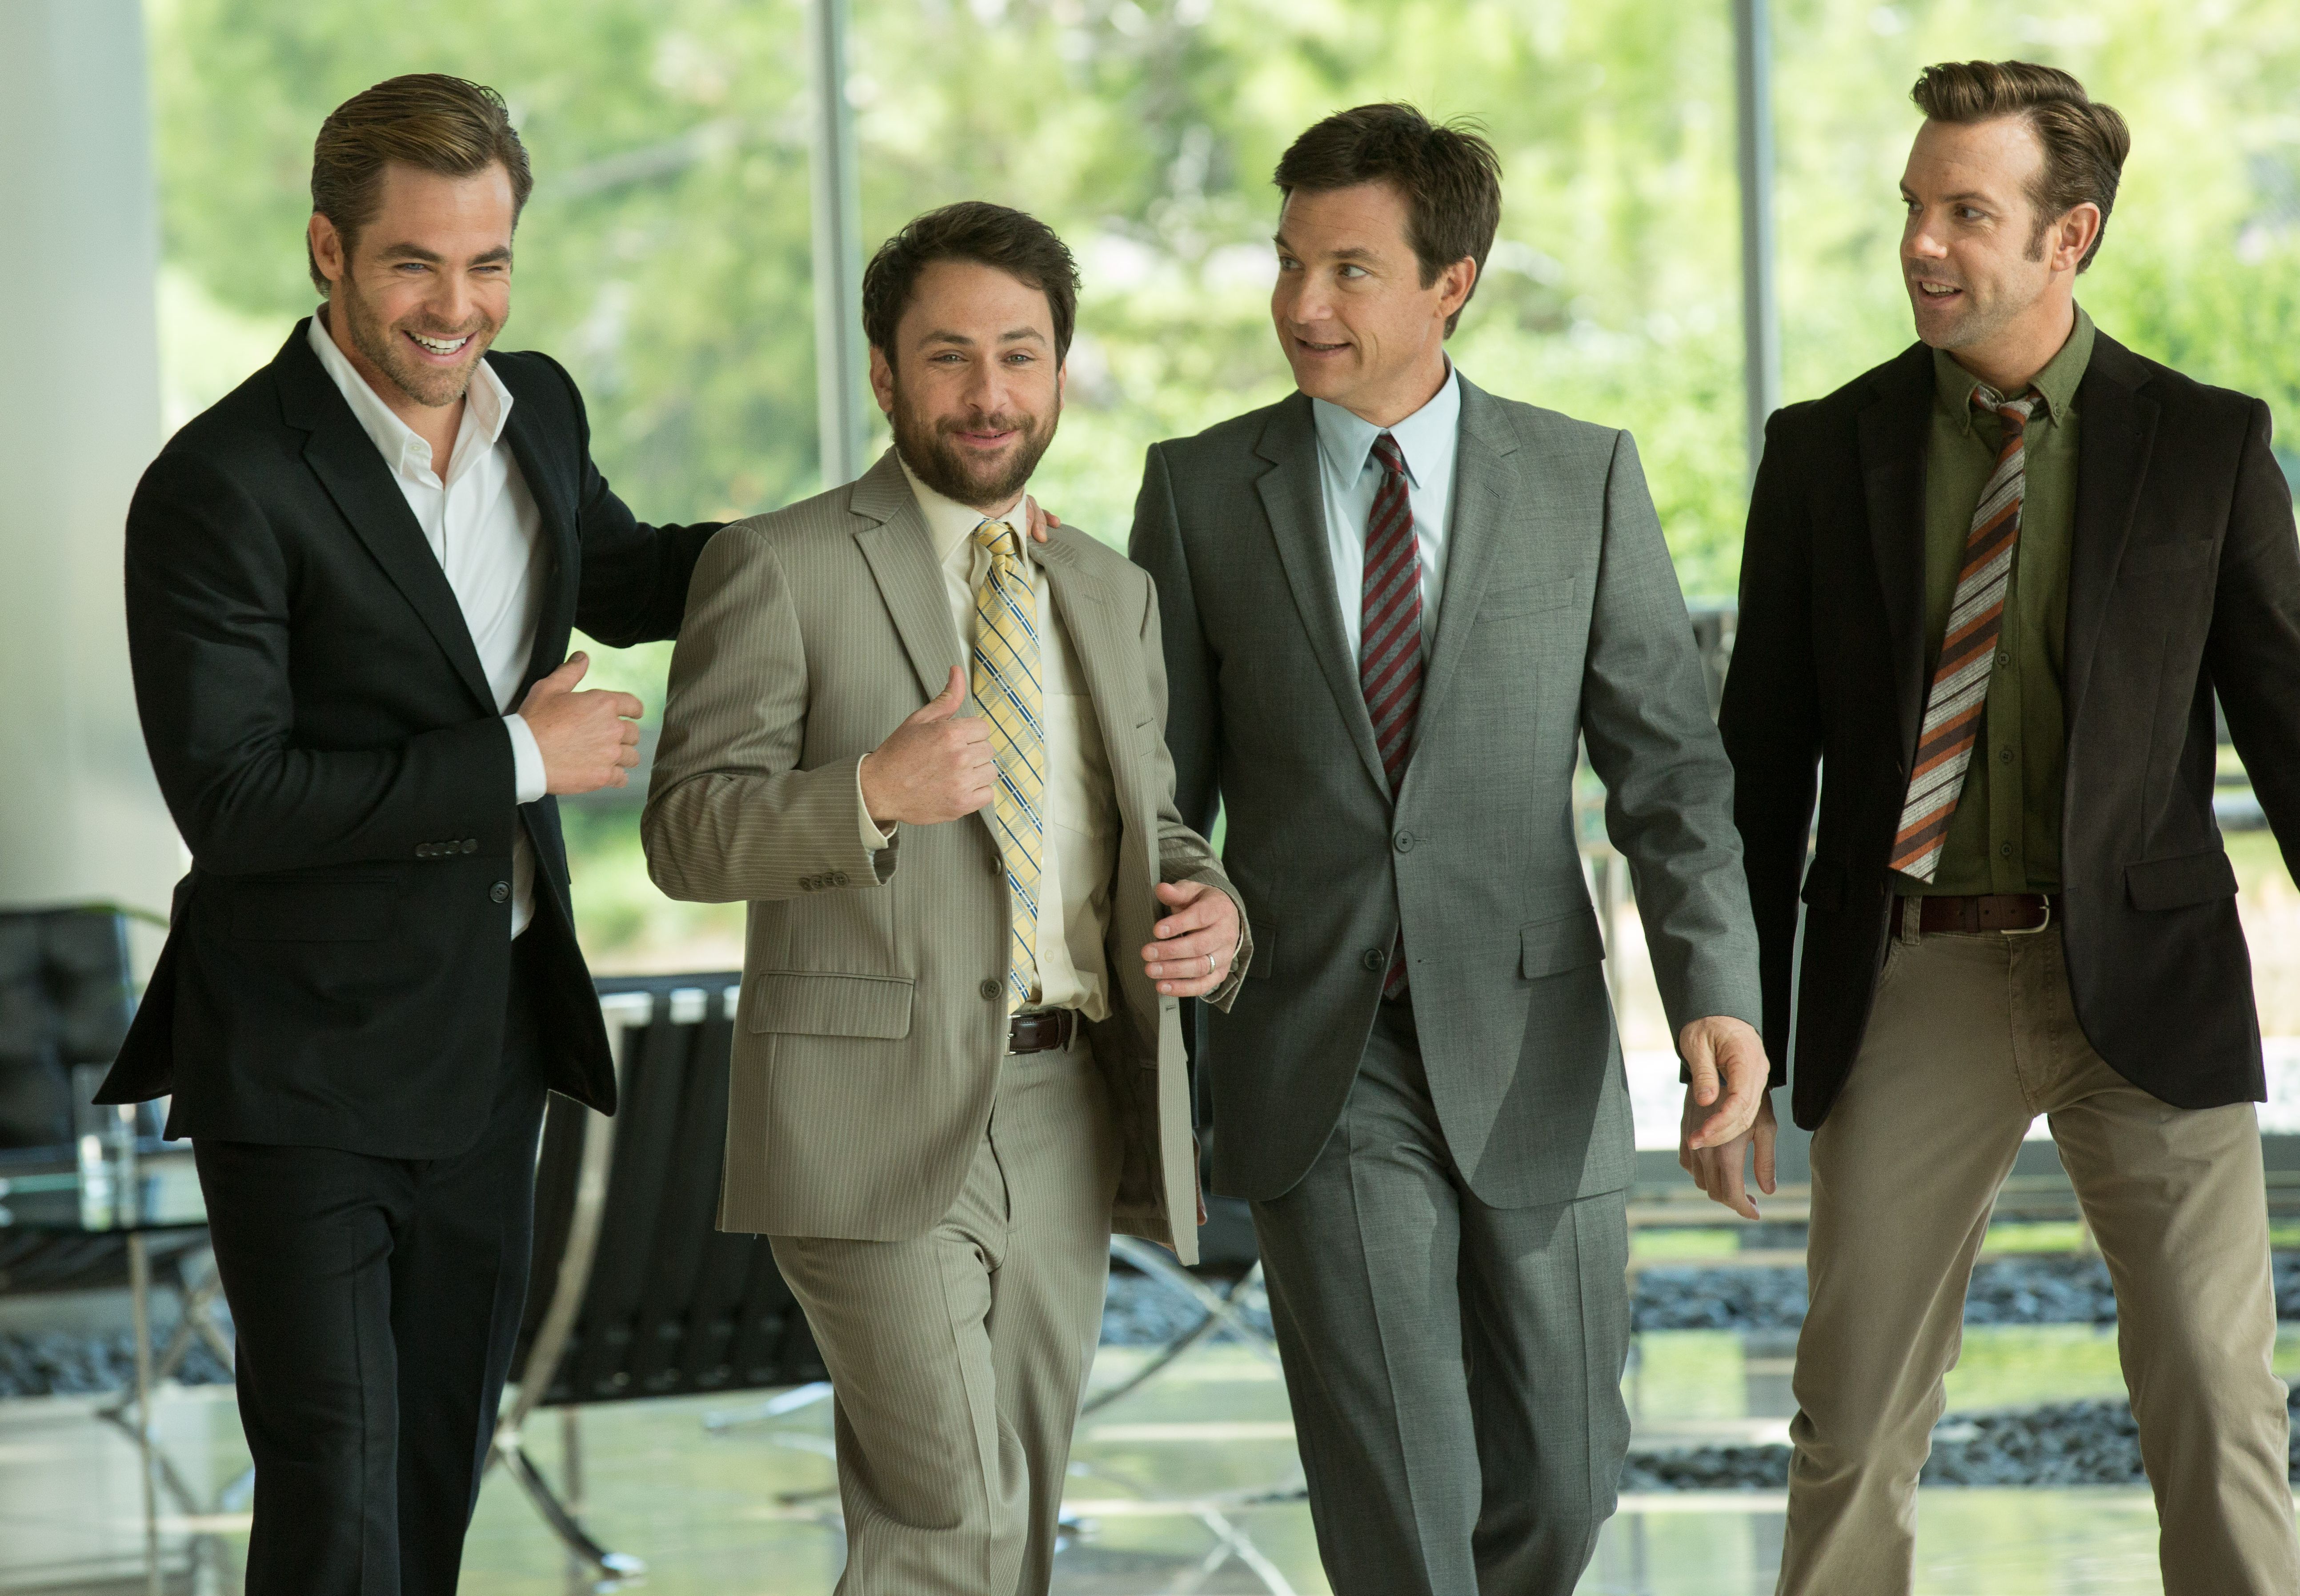 All wearing suits - Horrible Bosses 2